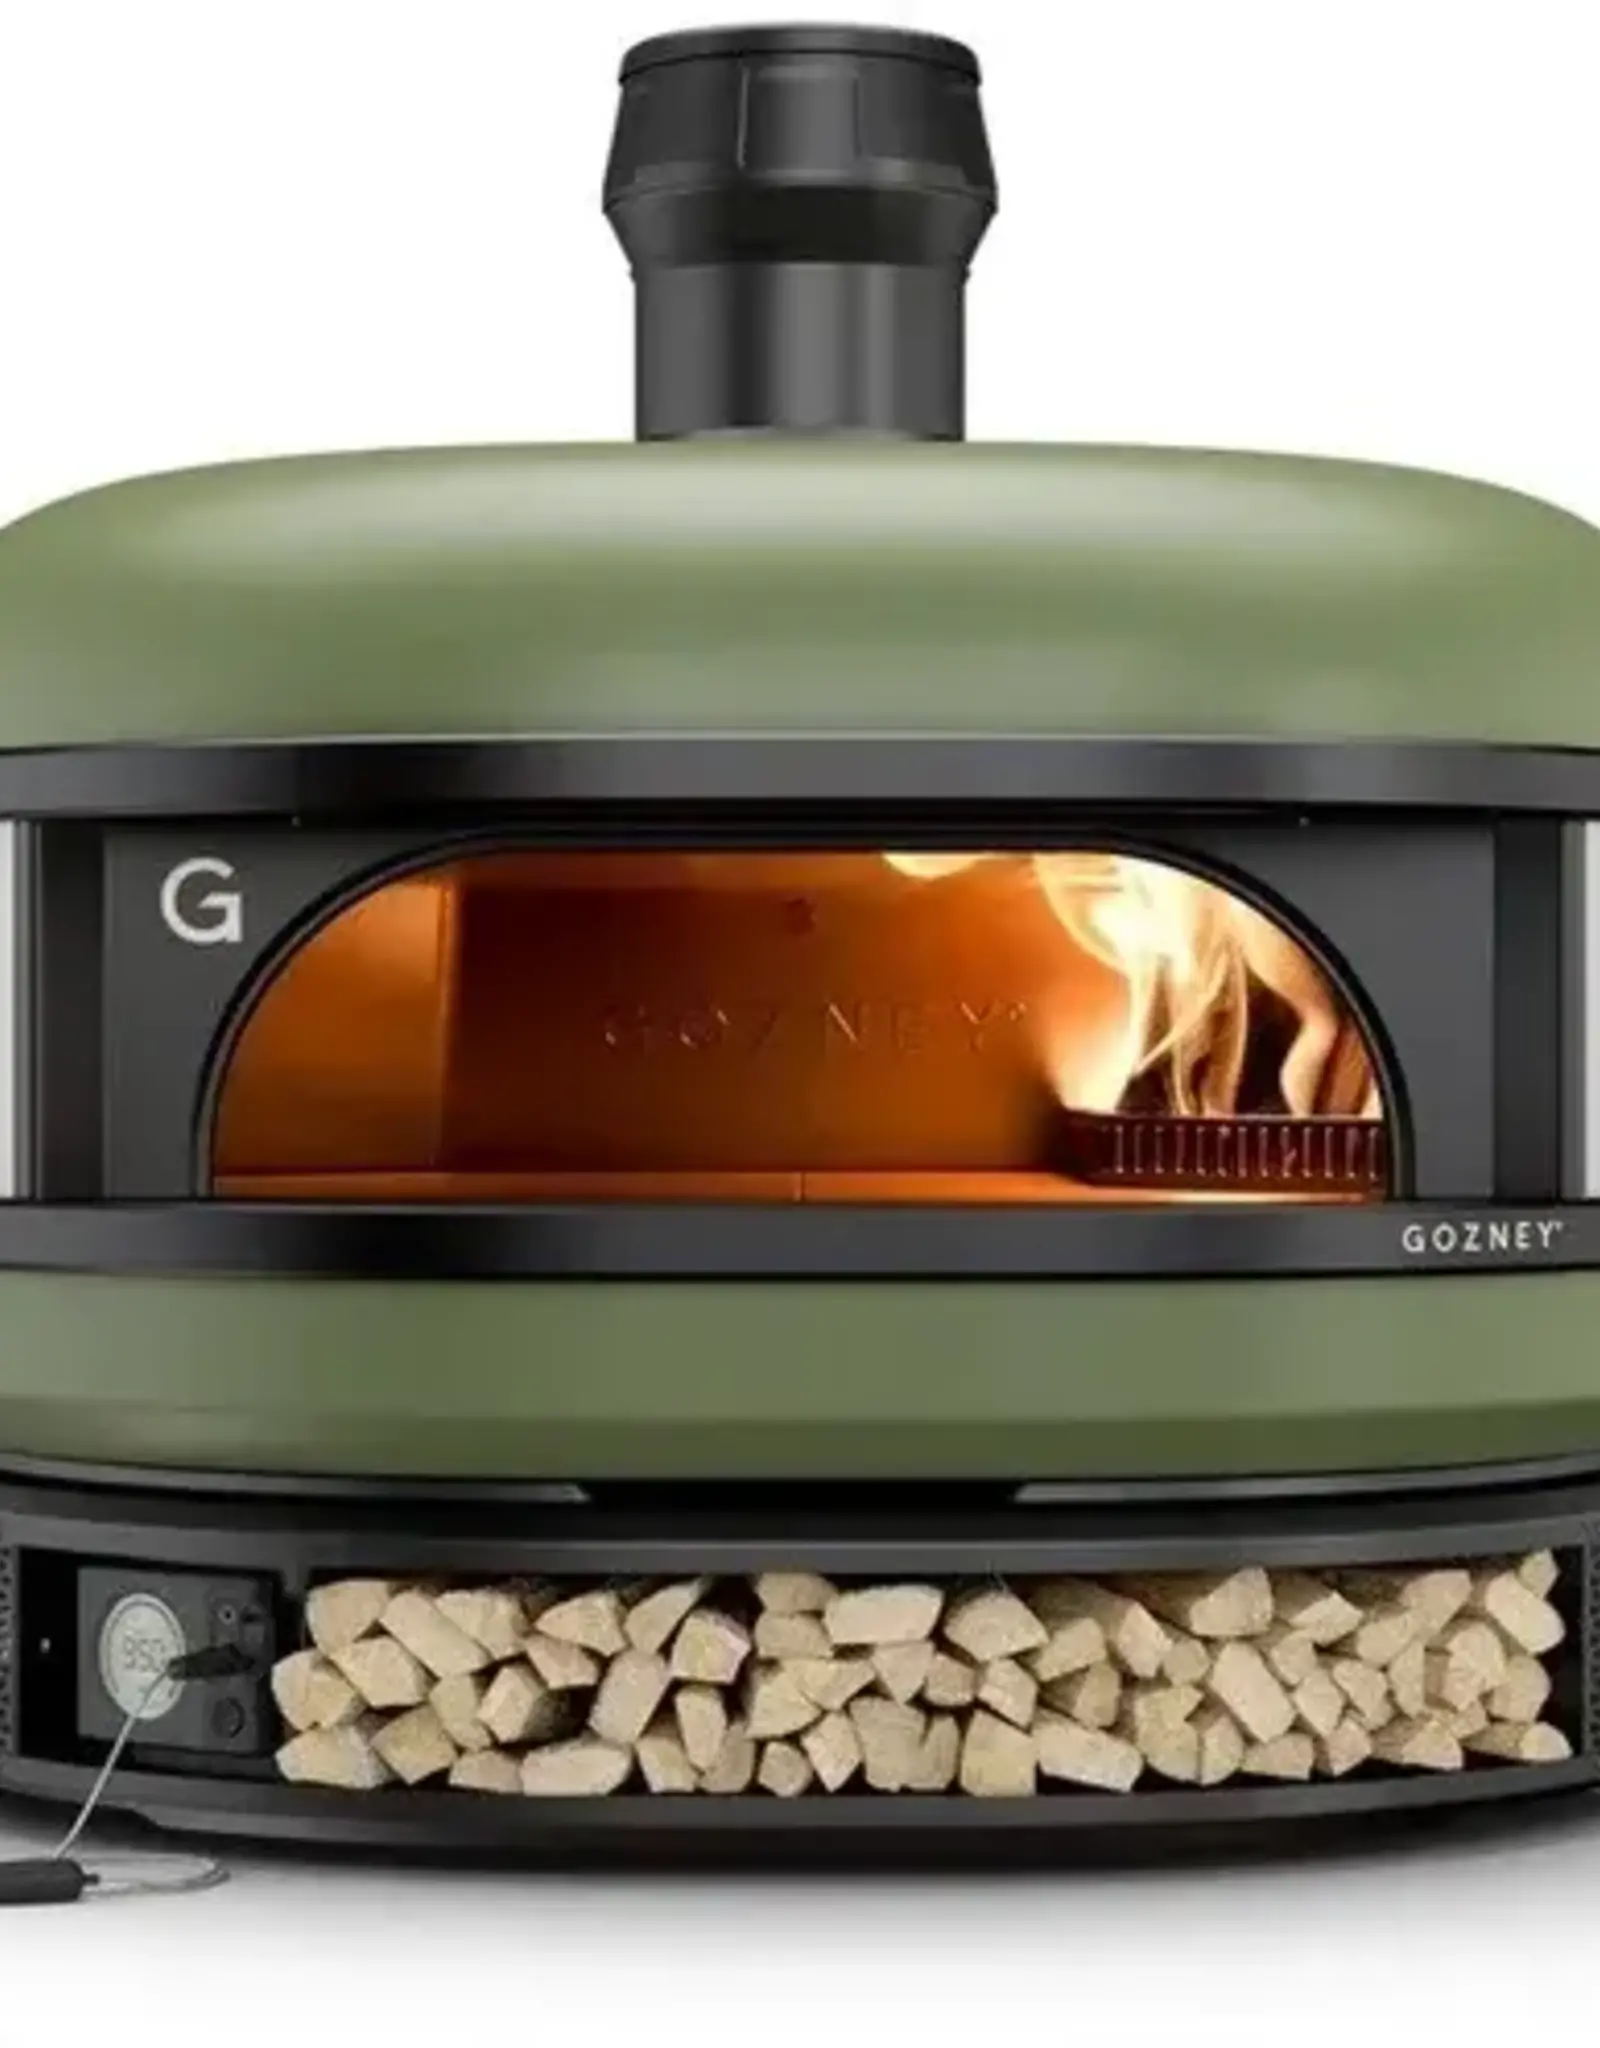 Gozney Gozney 29" Dome Natural Gas/Wood Outdoor Pizza Oven - Olive Green - GDNCOLUS1253